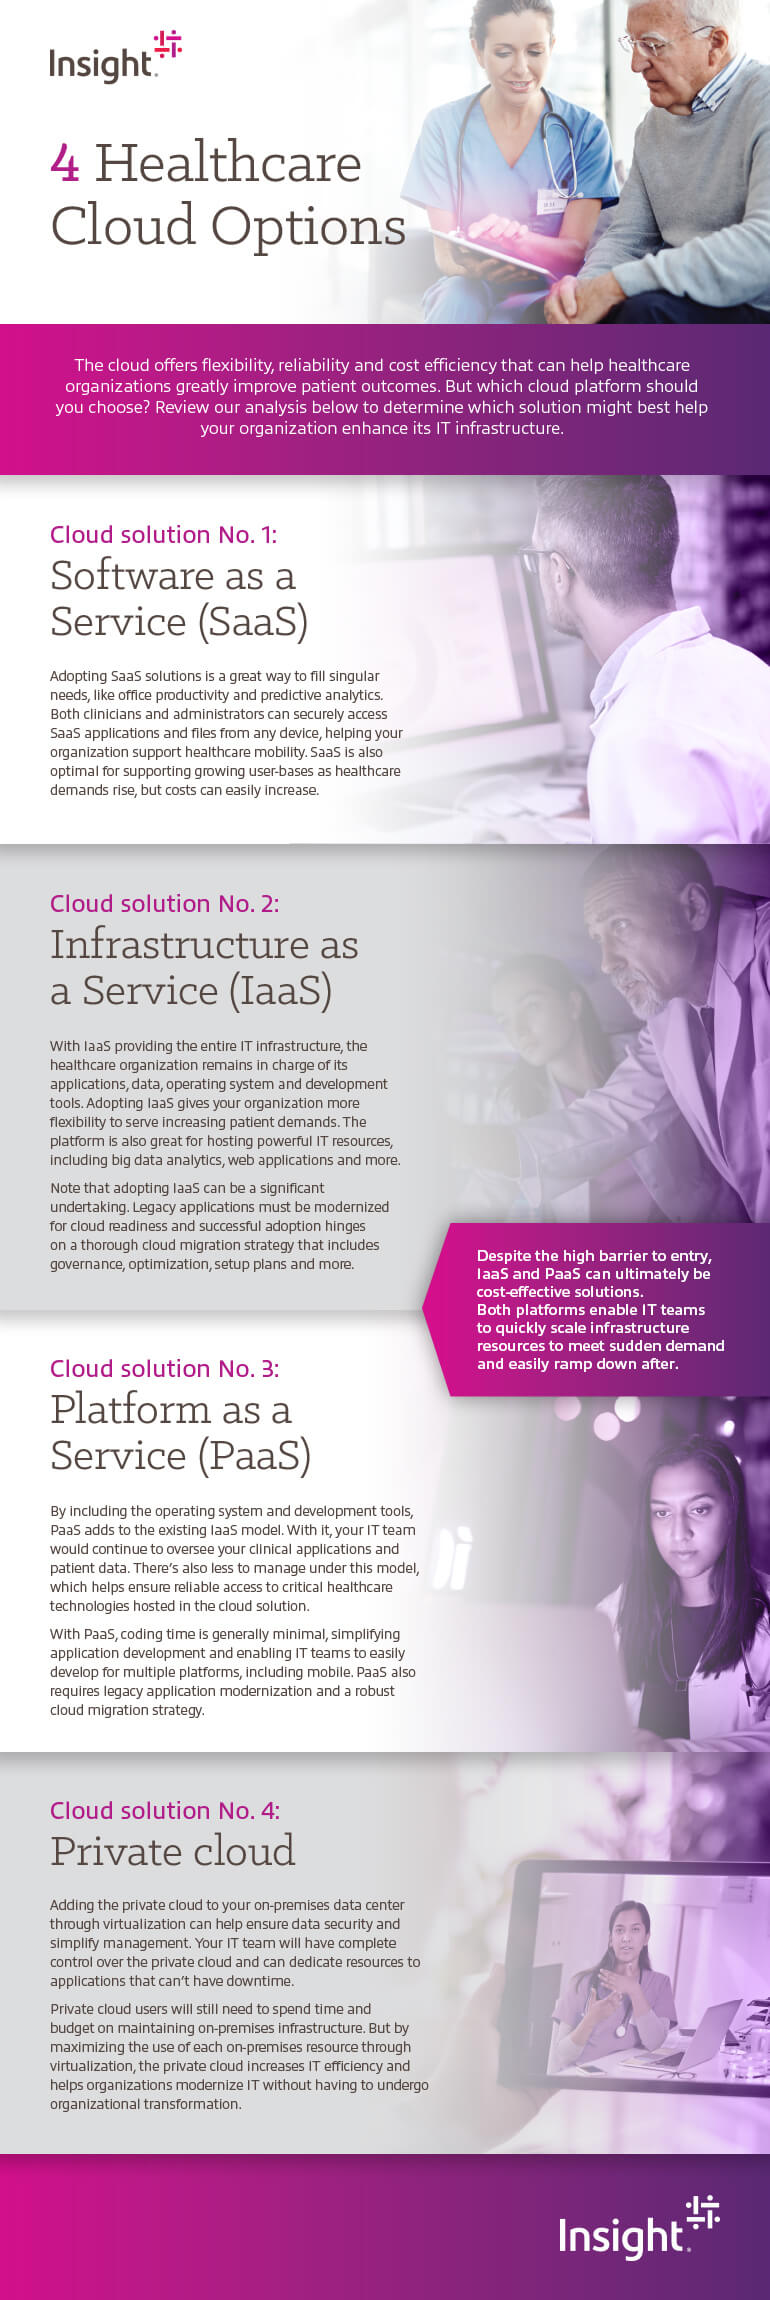 Evaluating Four Healthcare Cloud Options infographic as transcribed below